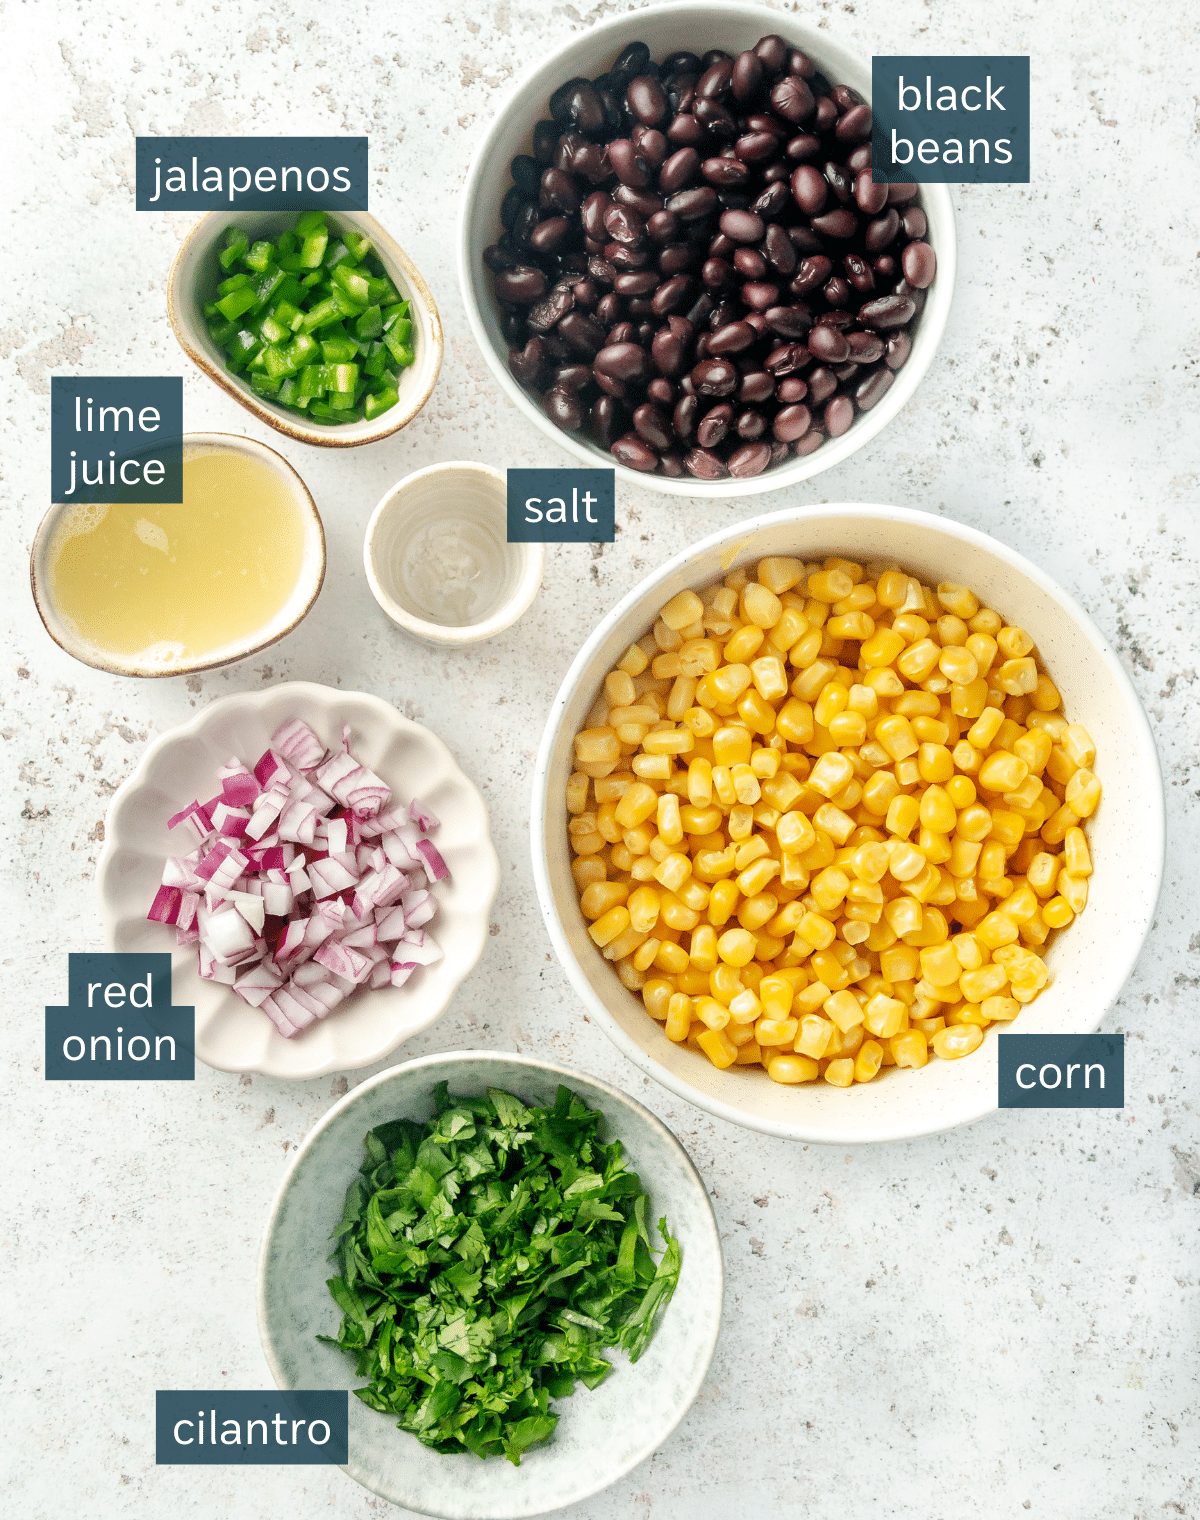 All of the ingredients needed for black bean and corn salsa portioned in different sized bowls on a light gray surface.